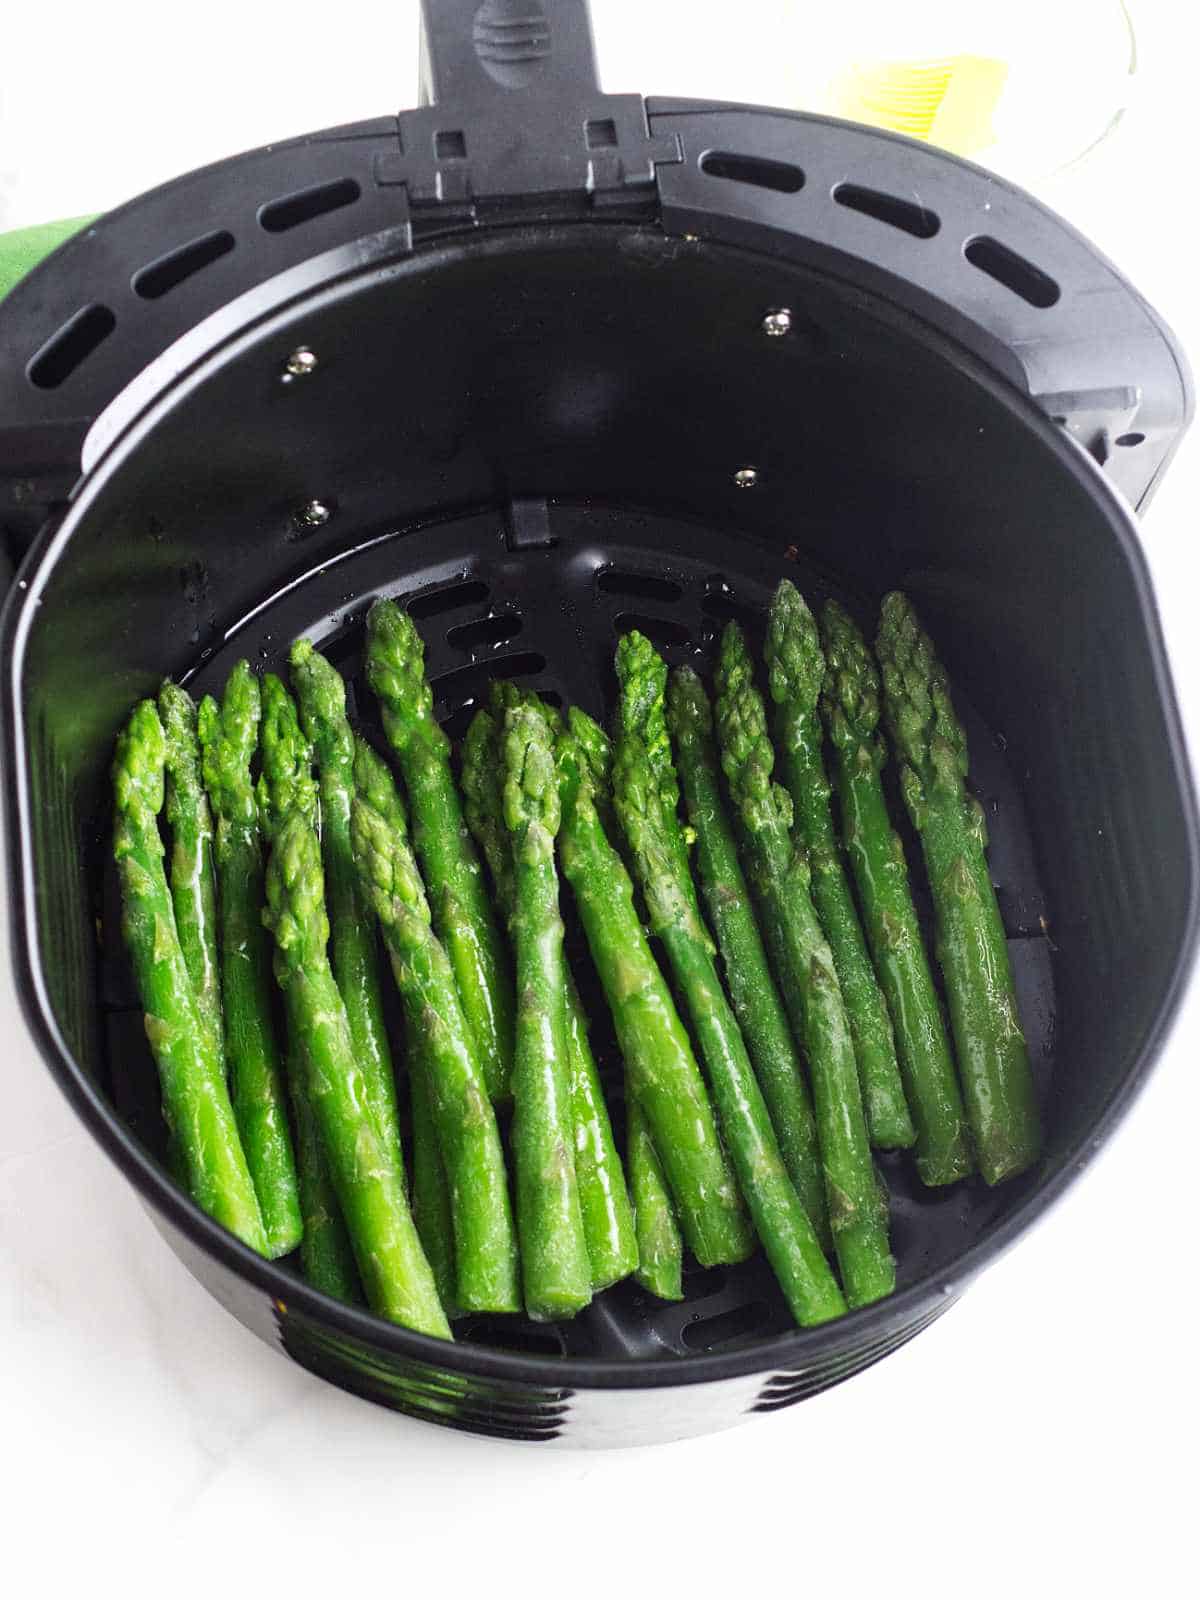 Frozen spears of asparagus brushed with olive oil and seasoned with salt and pepper.